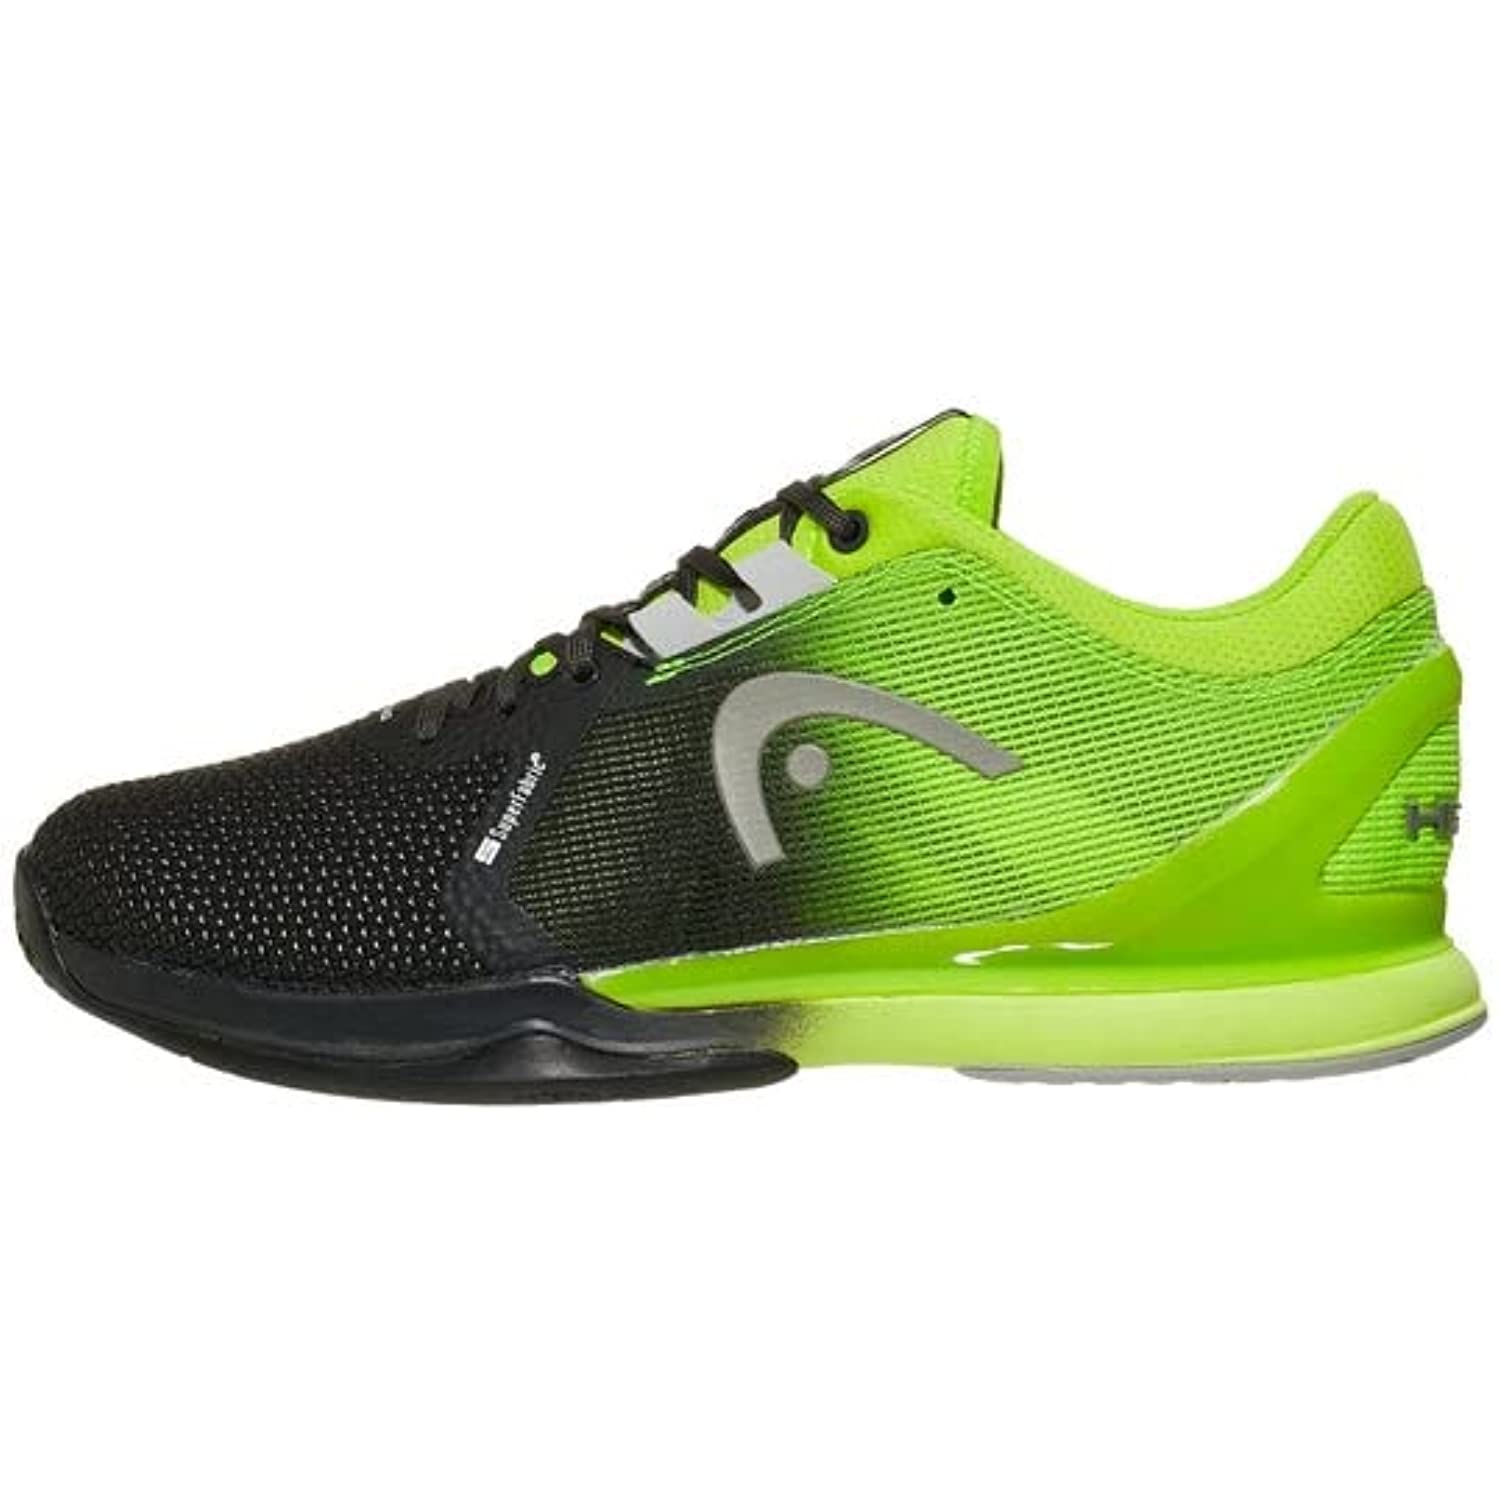 HEAD Men's Sprint Pro 3.0 SF Tennis Shoes (US, Numeric_12) Green - image 3 of 3